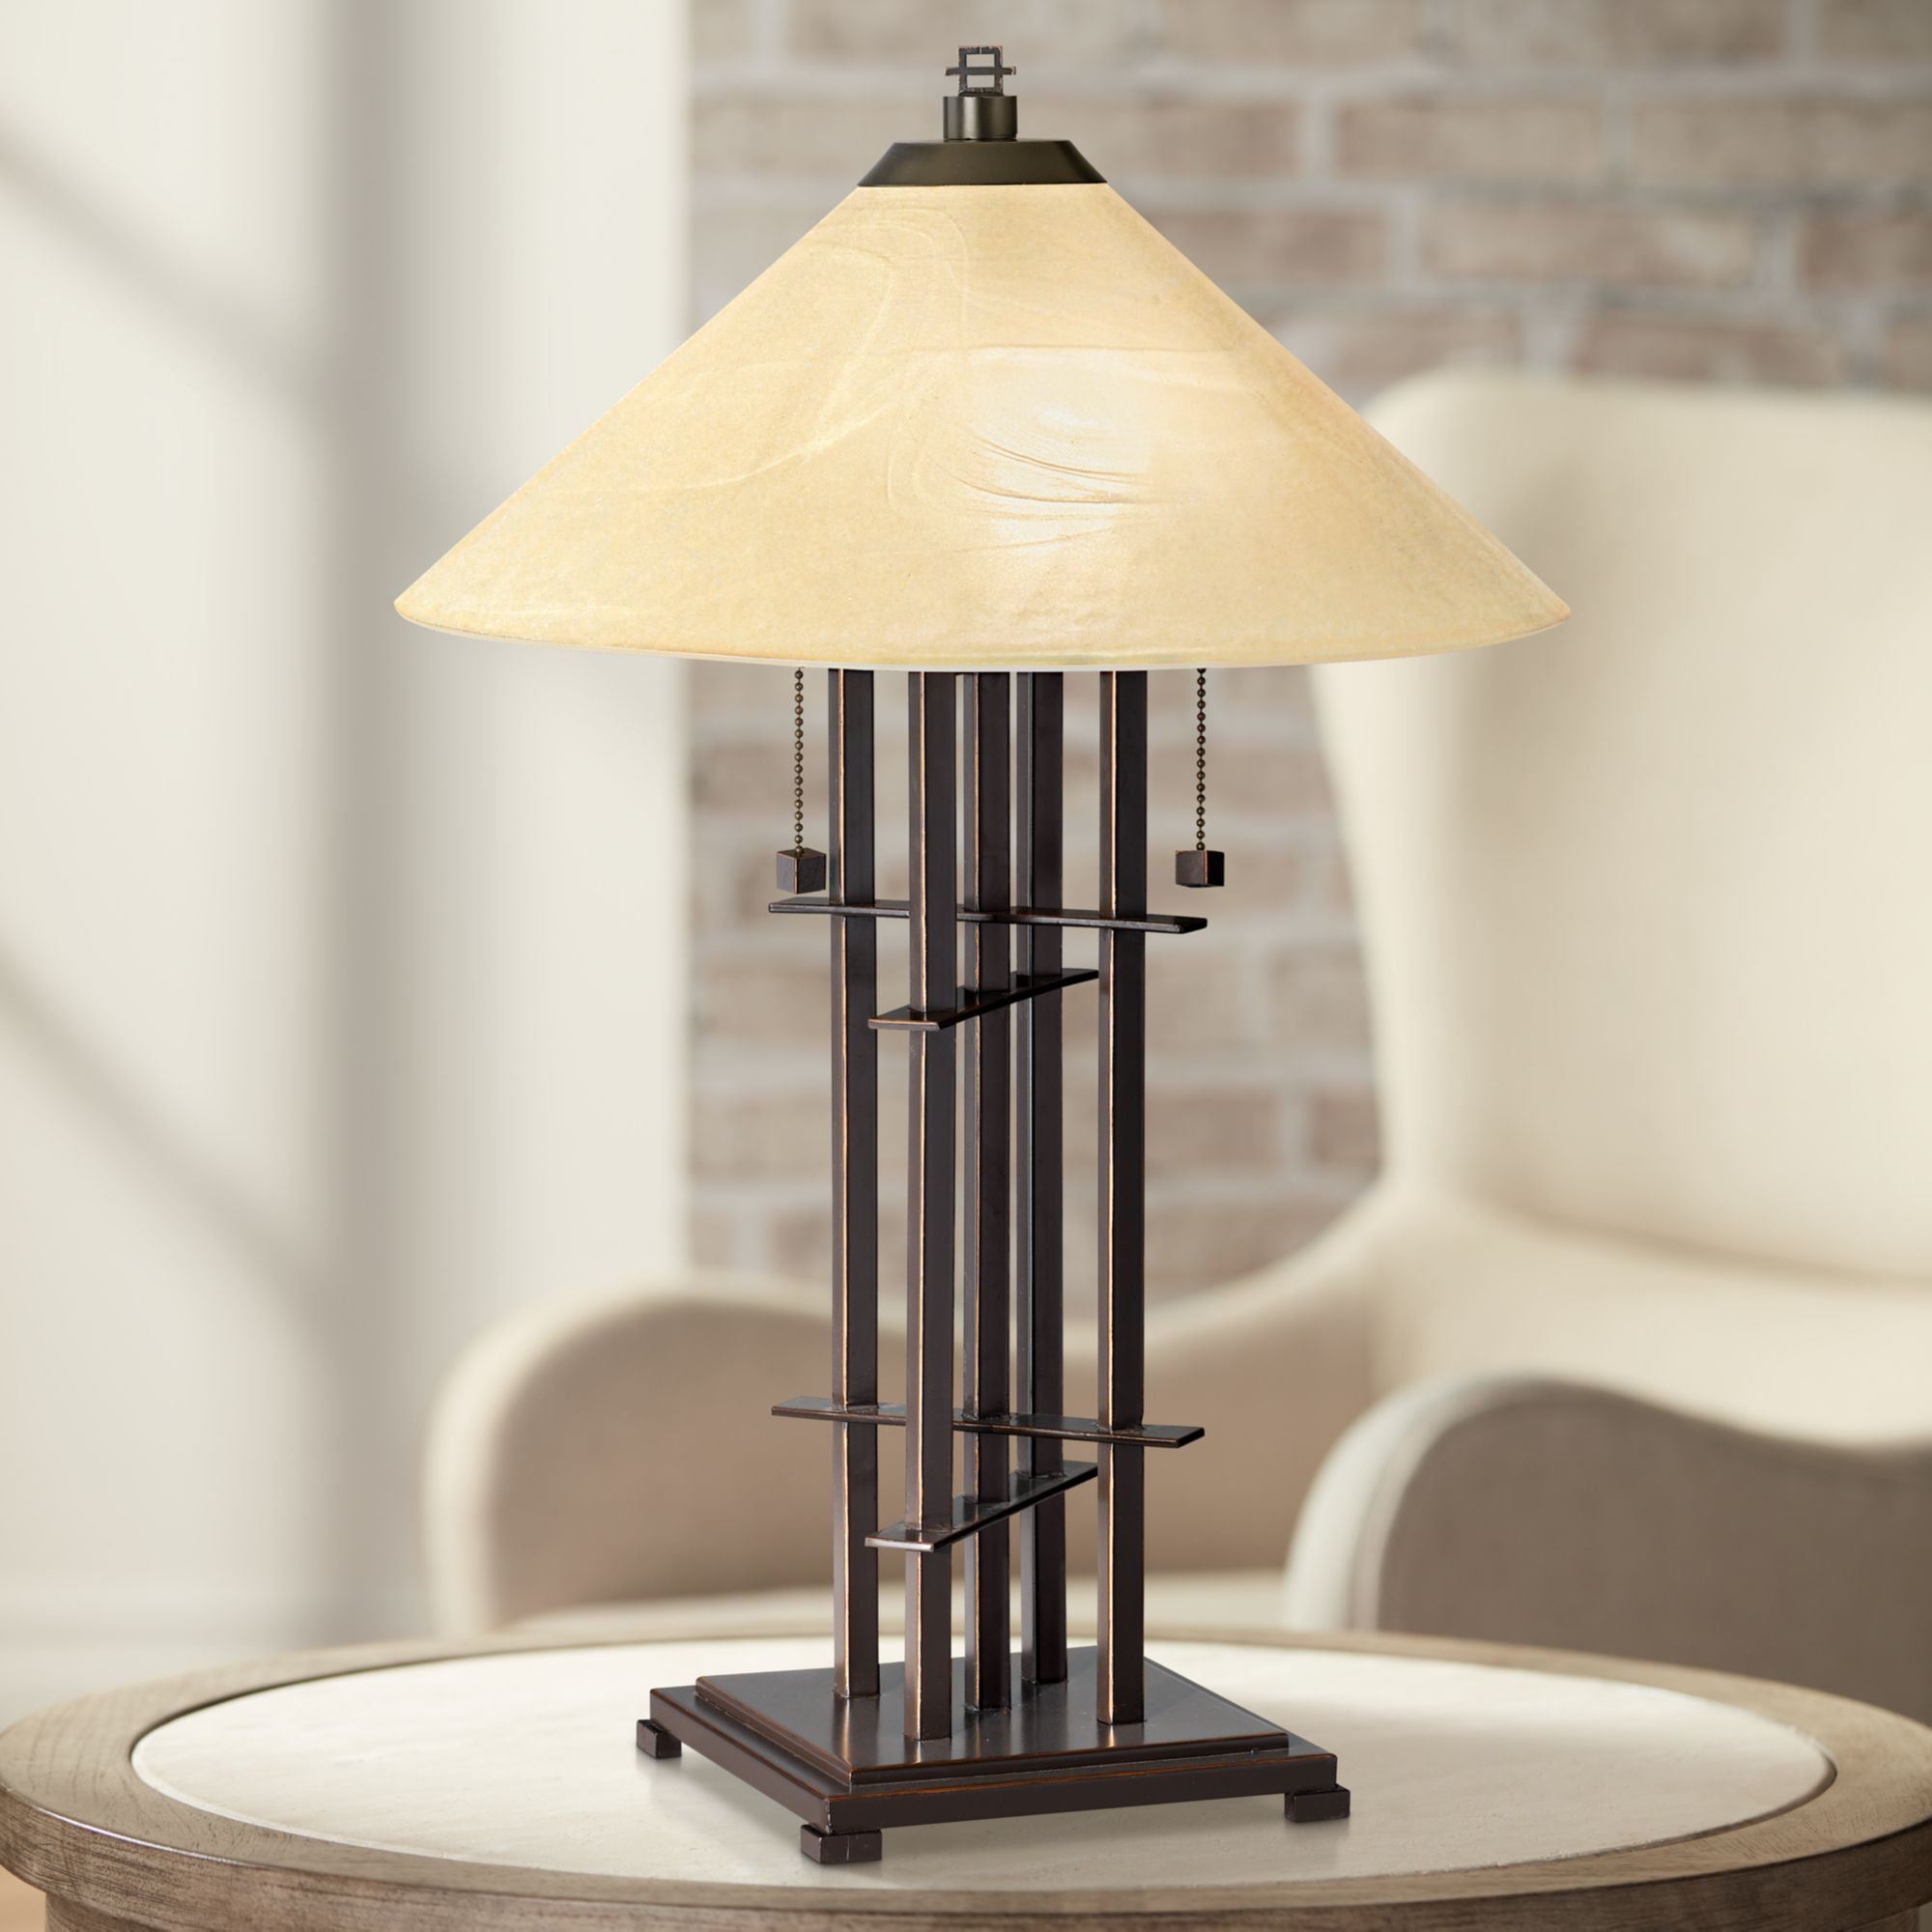 Franklin Iron Works Mission Accent, Antique Asian Table Lamps For Living Room